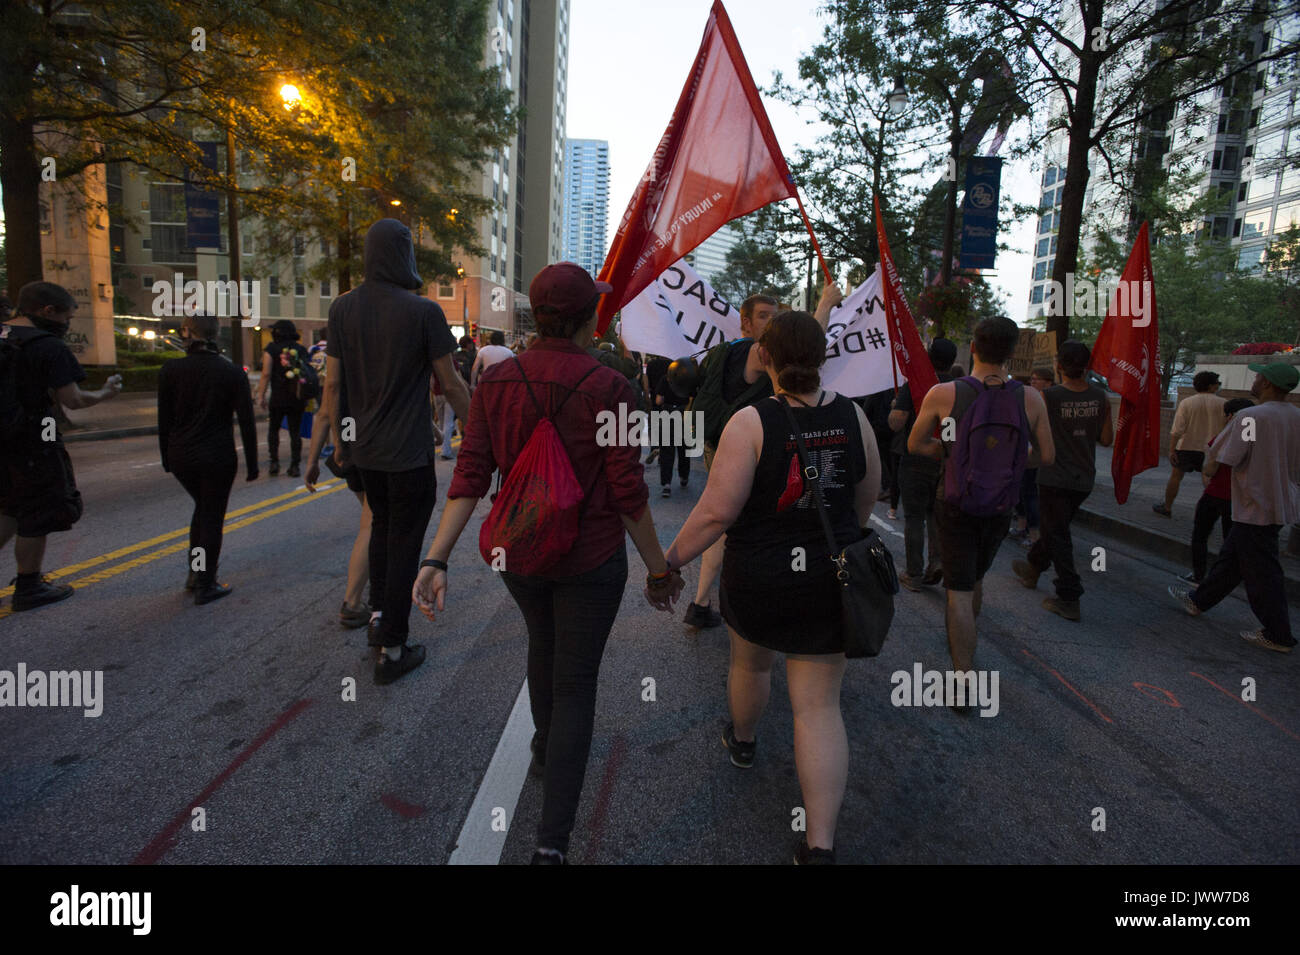 Atlanta, GA, USA. 13th Aug, 2017. Anti-Fascist protestors gather in downtown Atlanta and march along Peachtree Street, showing their support of those who demonstrated against white supremacist group in Charlottesville, VA. Rally organized by Antifa, an organization nationally that fights fascism.Pictured: Demonstrators march down Peachtree Street, obstructing traffic. Credit: Robin Rayne Nelson/ZUMA Wire/Alamy Live News Stock Photo